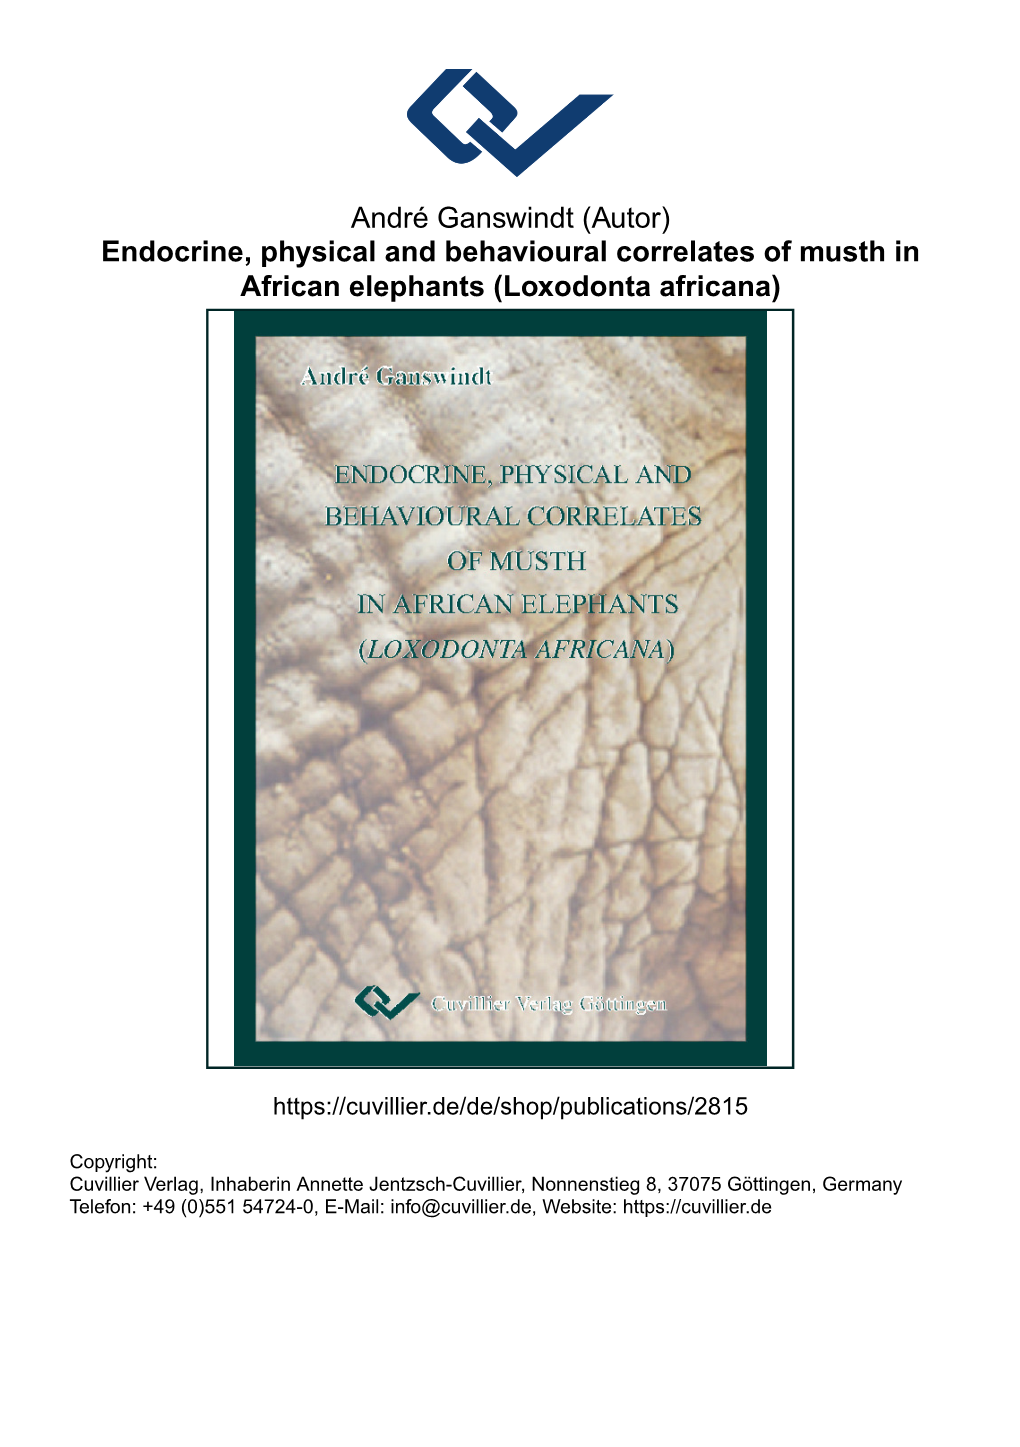 Endocrine, Physical and Behavioural Correlates of Musth in African Elephants (Loxodonta Africana)